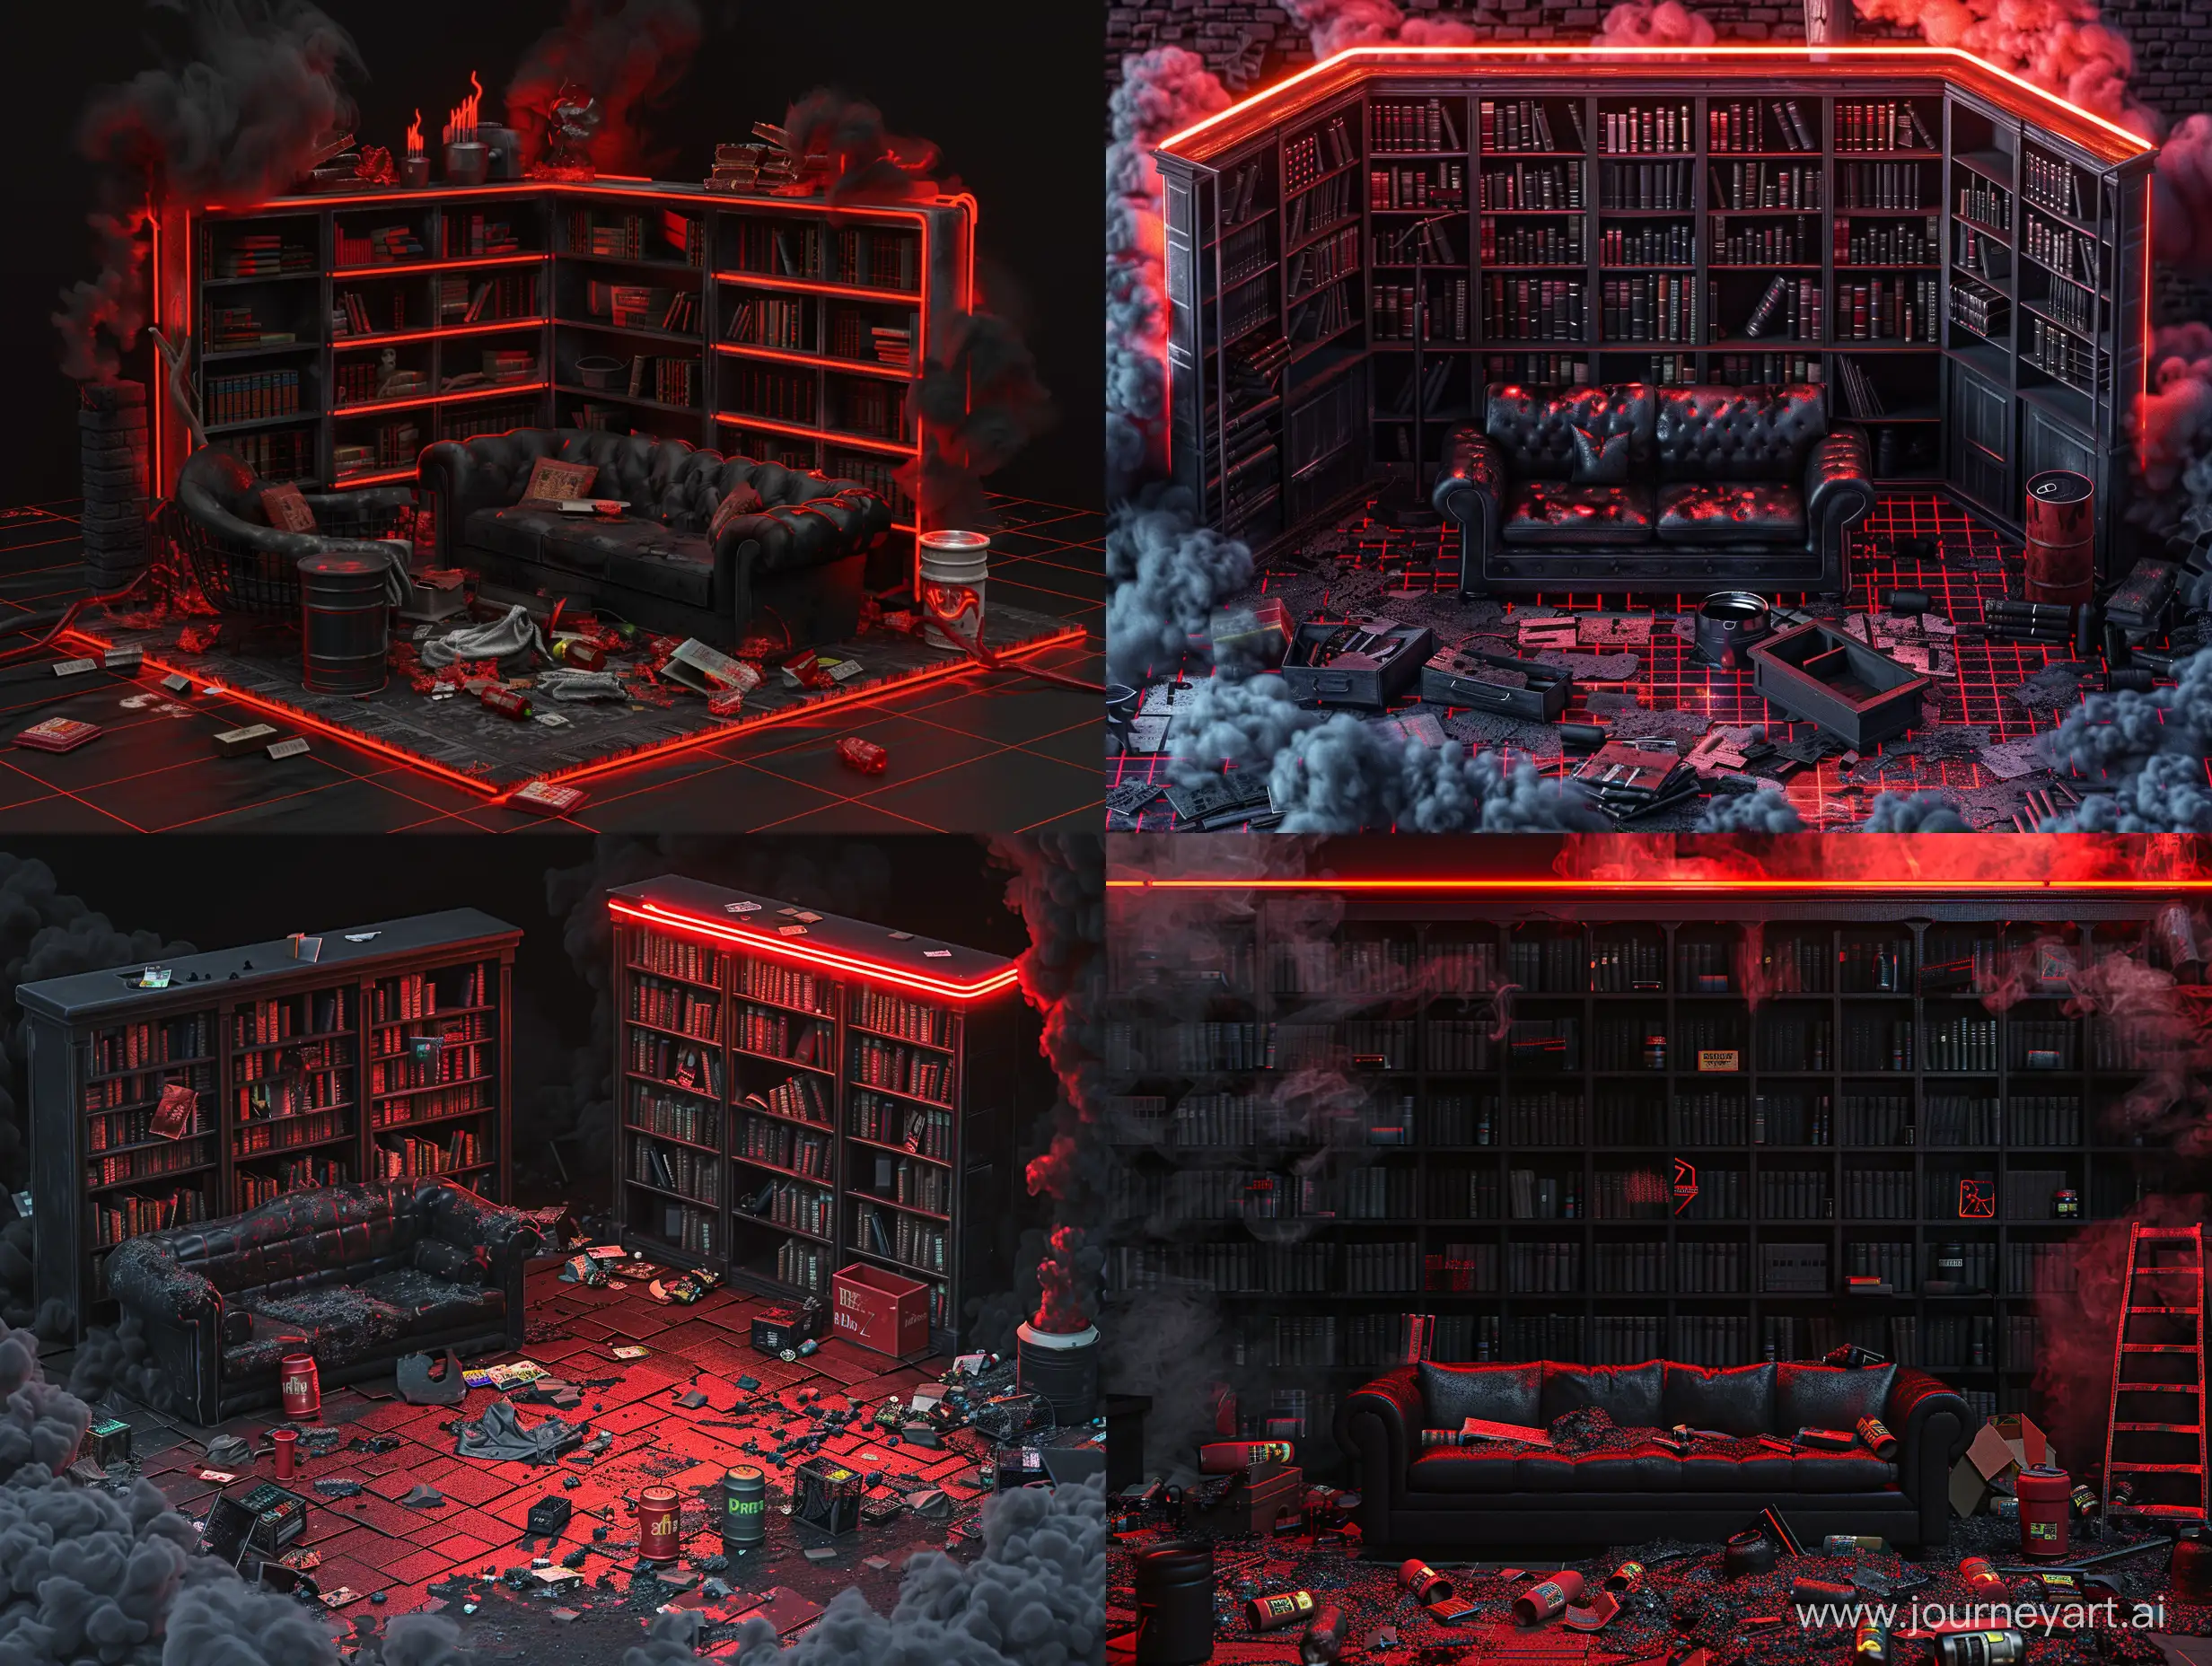 Eerie-3D-Render-of-a-Spooky-Ghost-Town-with-Black-Sofa-Library-and-Neon-Lights